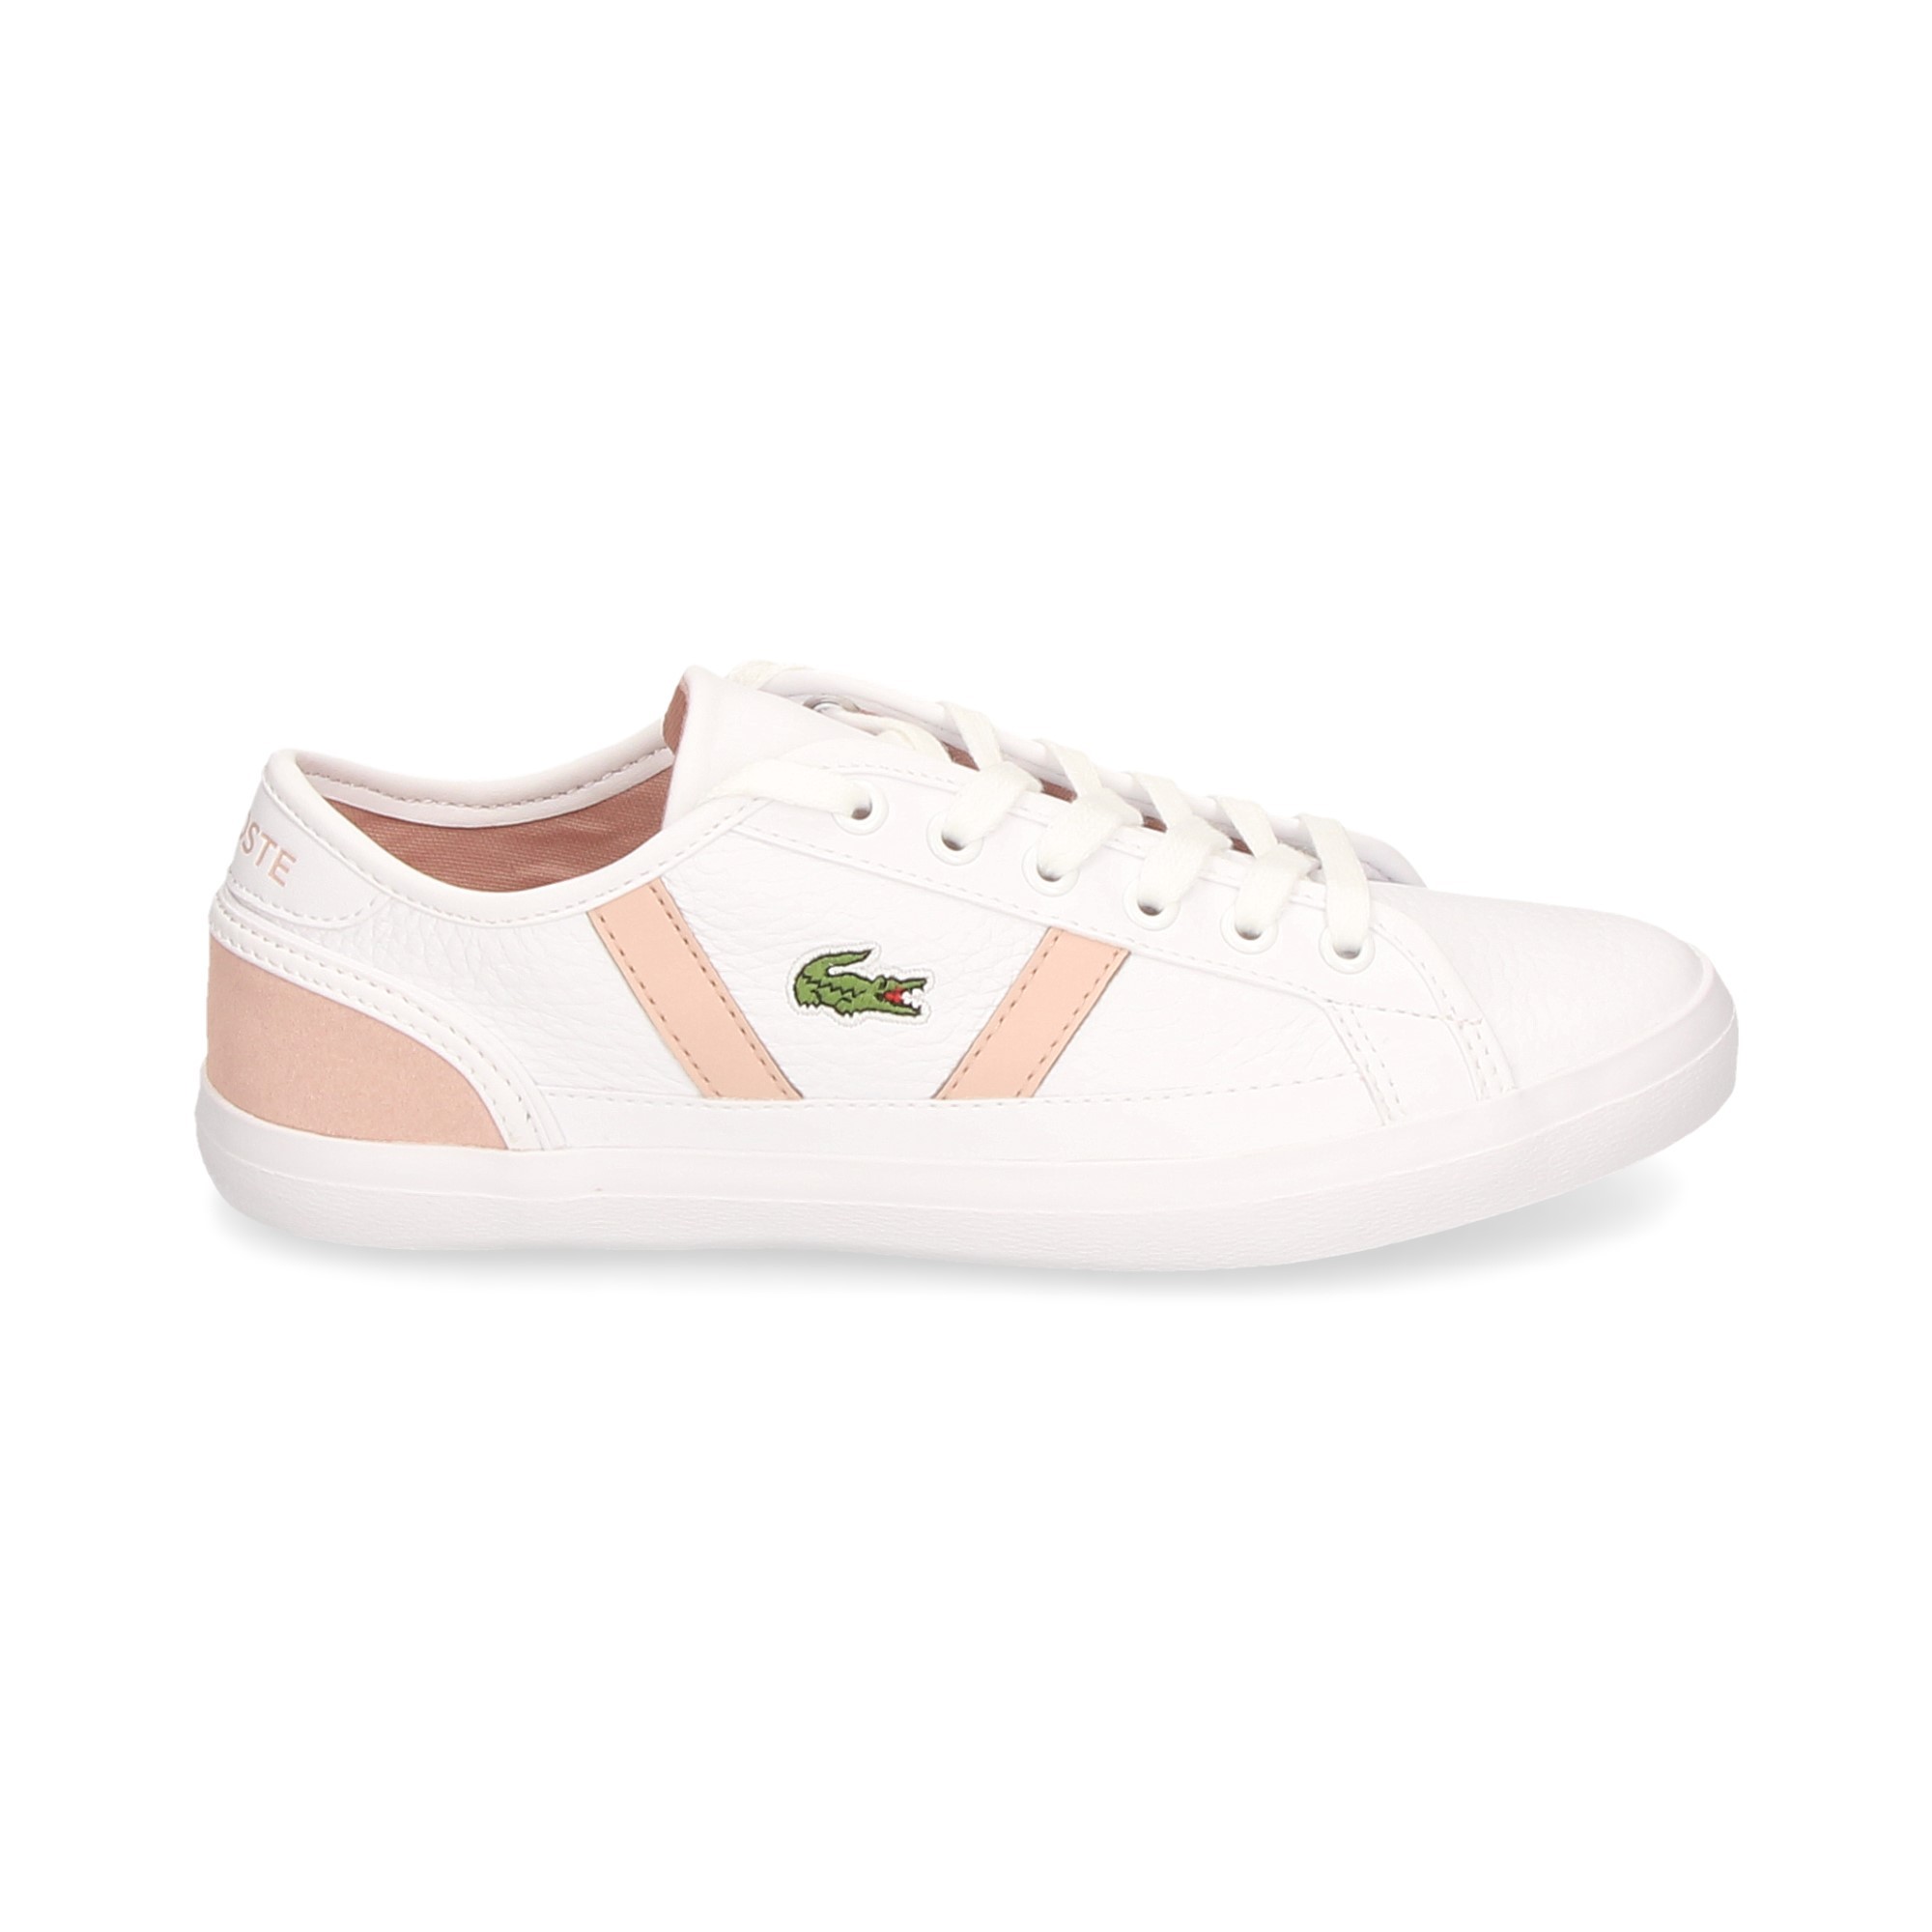 weisse-sport-rosa-band